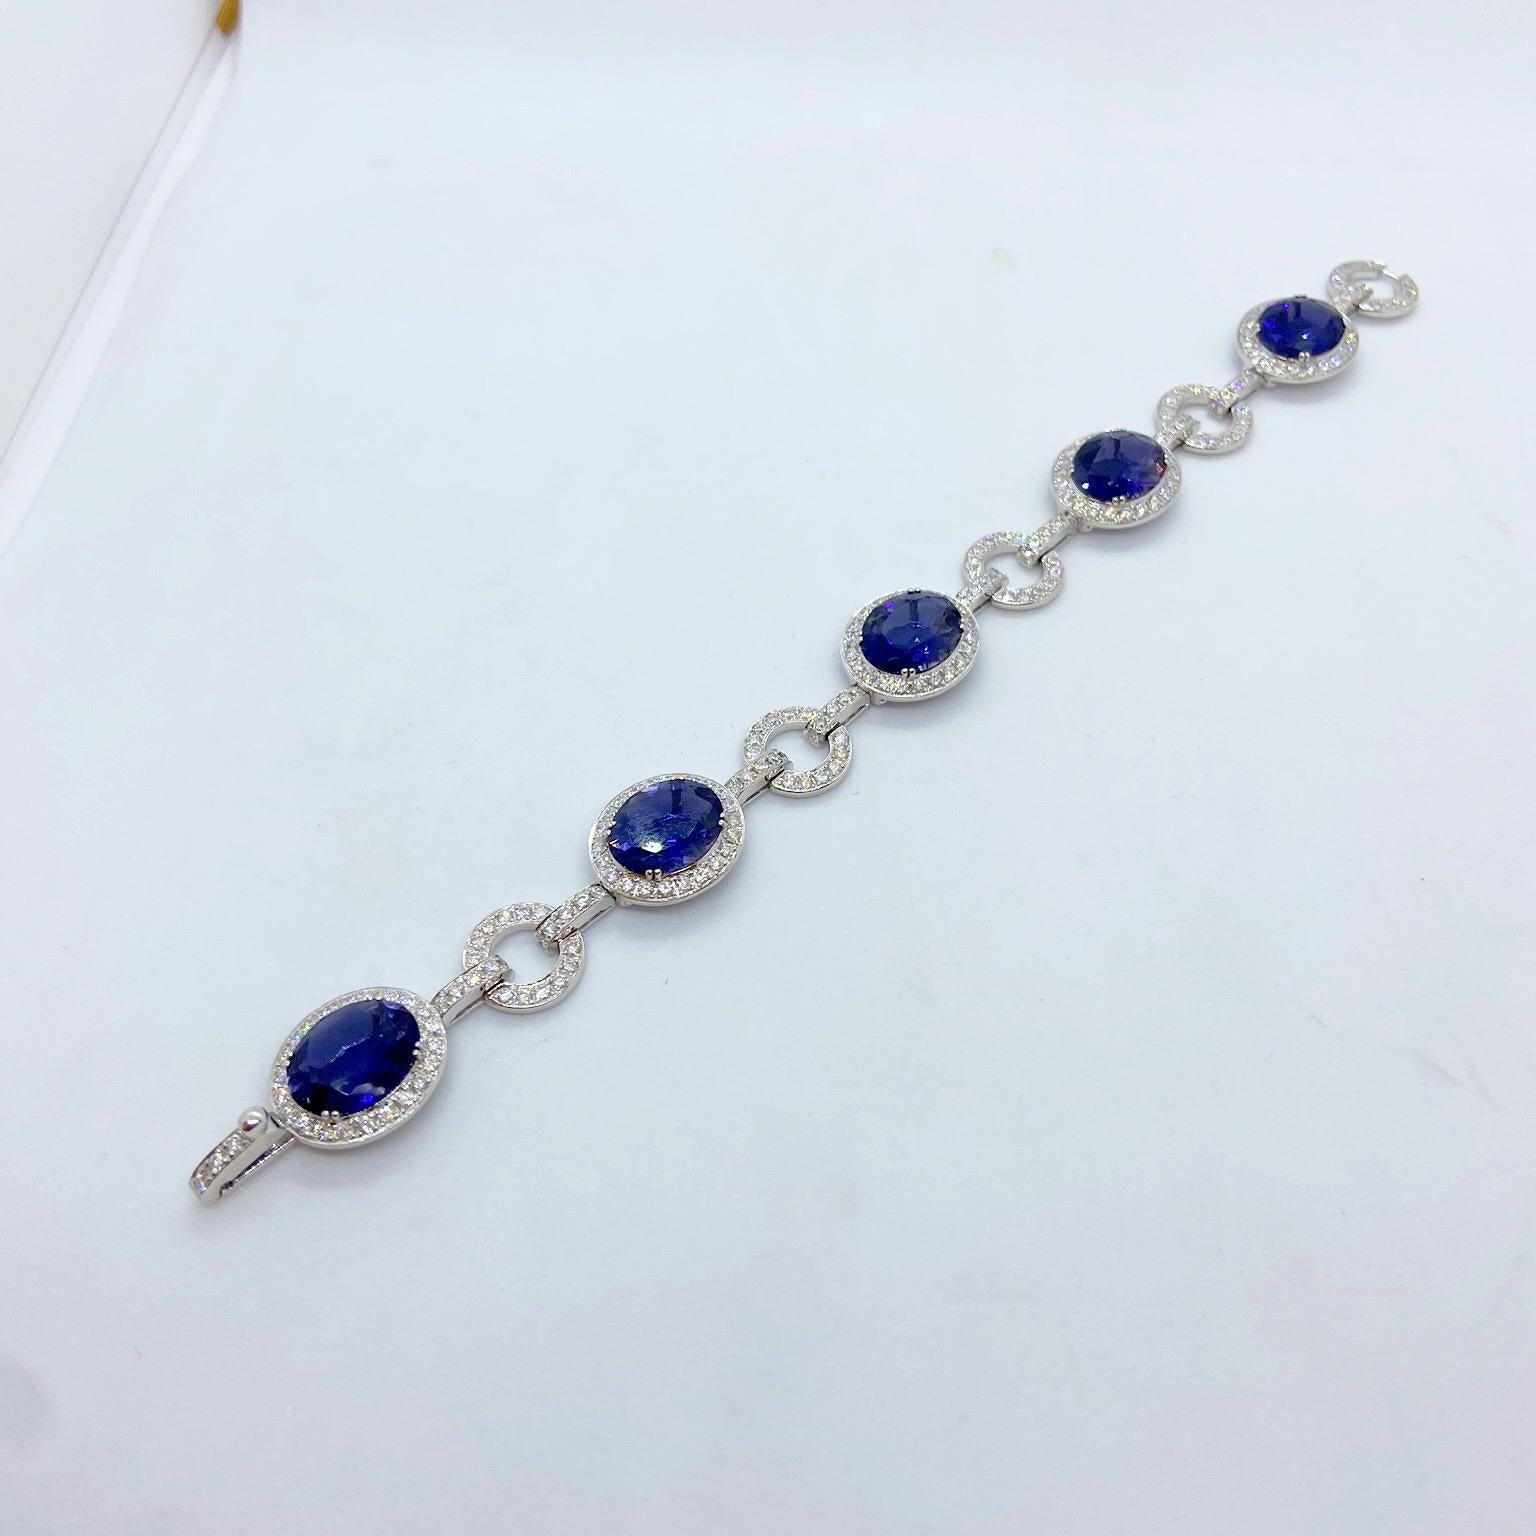 18 karat white gold bracelet set with 5 oval Iolite stones. Each oval stone is set in a bezel of round brilliant Diamonds.. Alternating between the Iolites are round links with the same Diamond setting. The clasp is also set with Diamonds for a